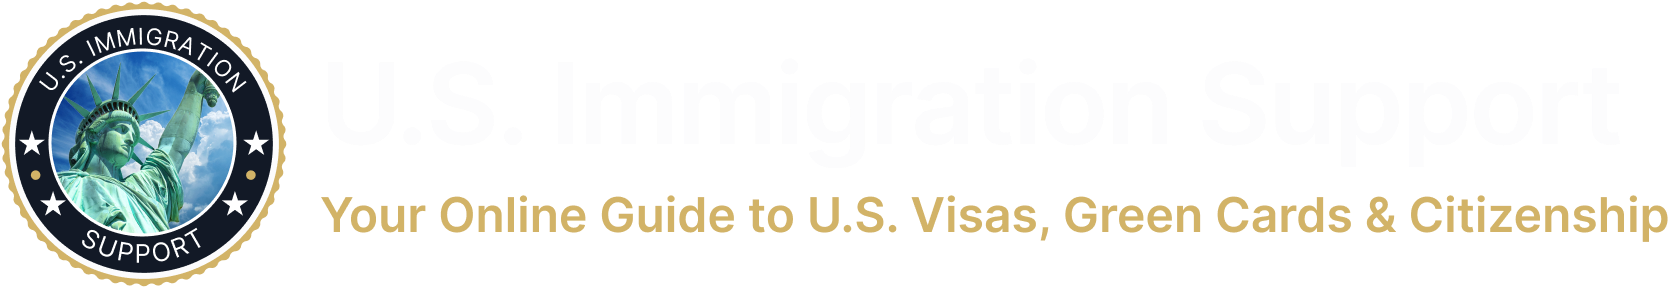 US Immigration Support